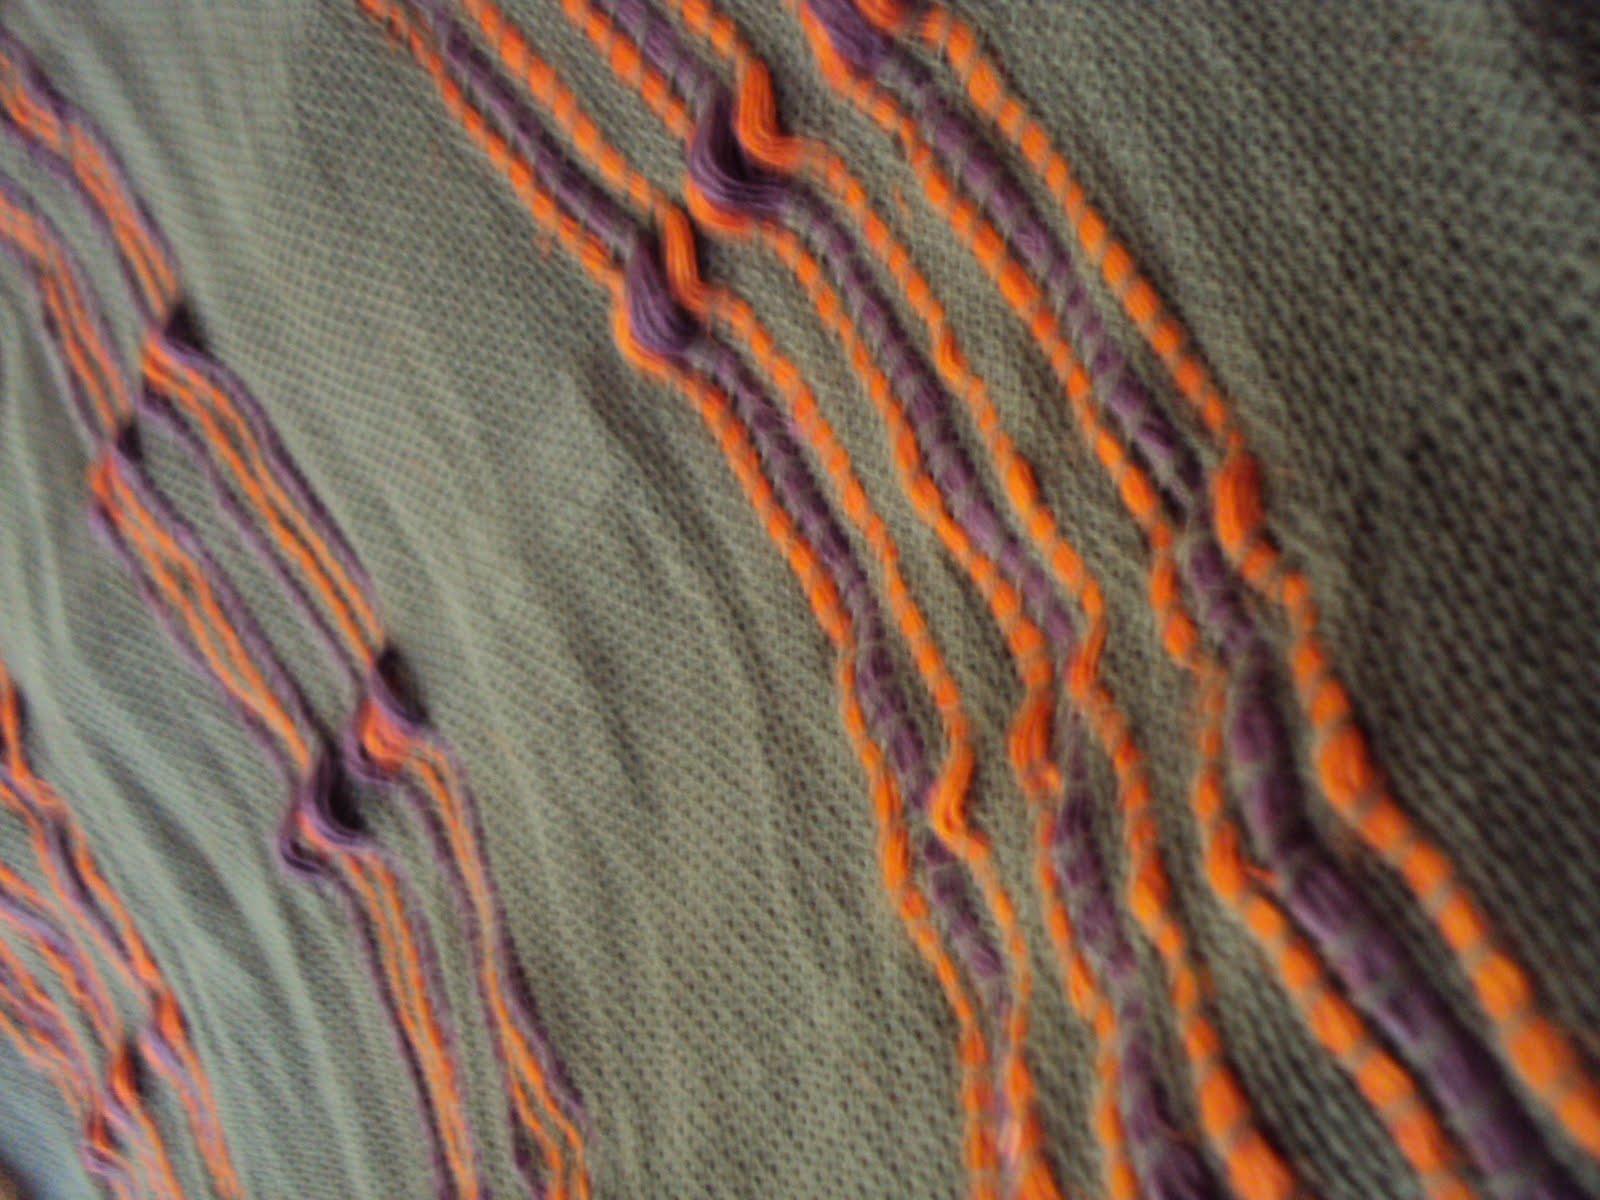 Sussi the traditional weaving pattern